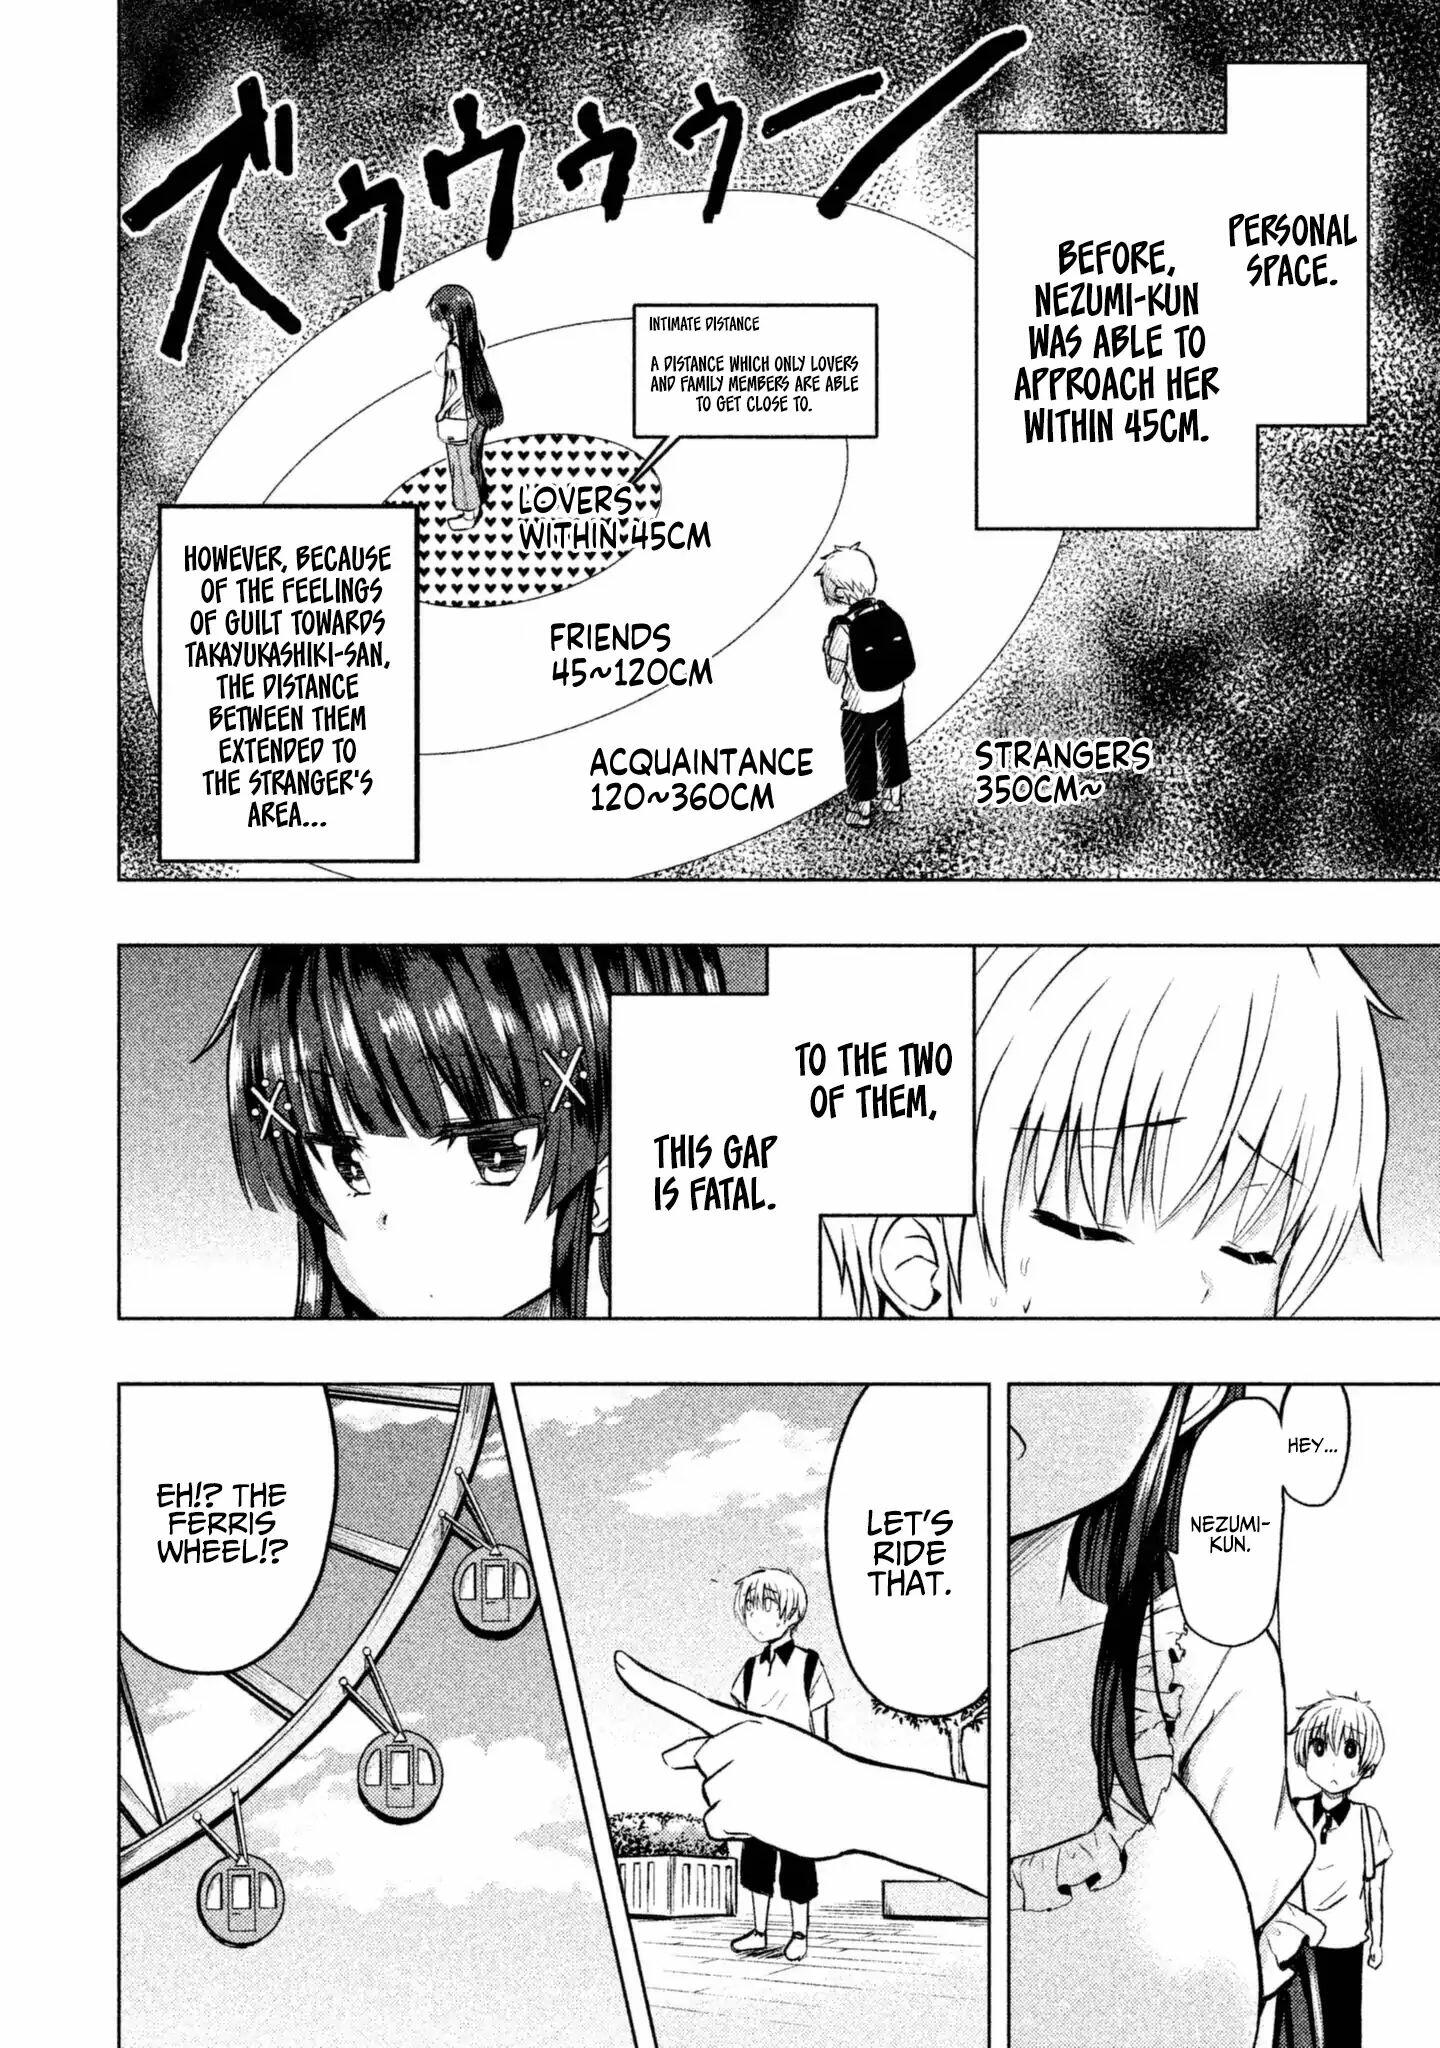 A Girl Who Is Very Well-Informed About Weird Knowledge, Takayukashiki Souko-San Vol.1 Chapter 8: Distance page 3 - Mangakakalots.com